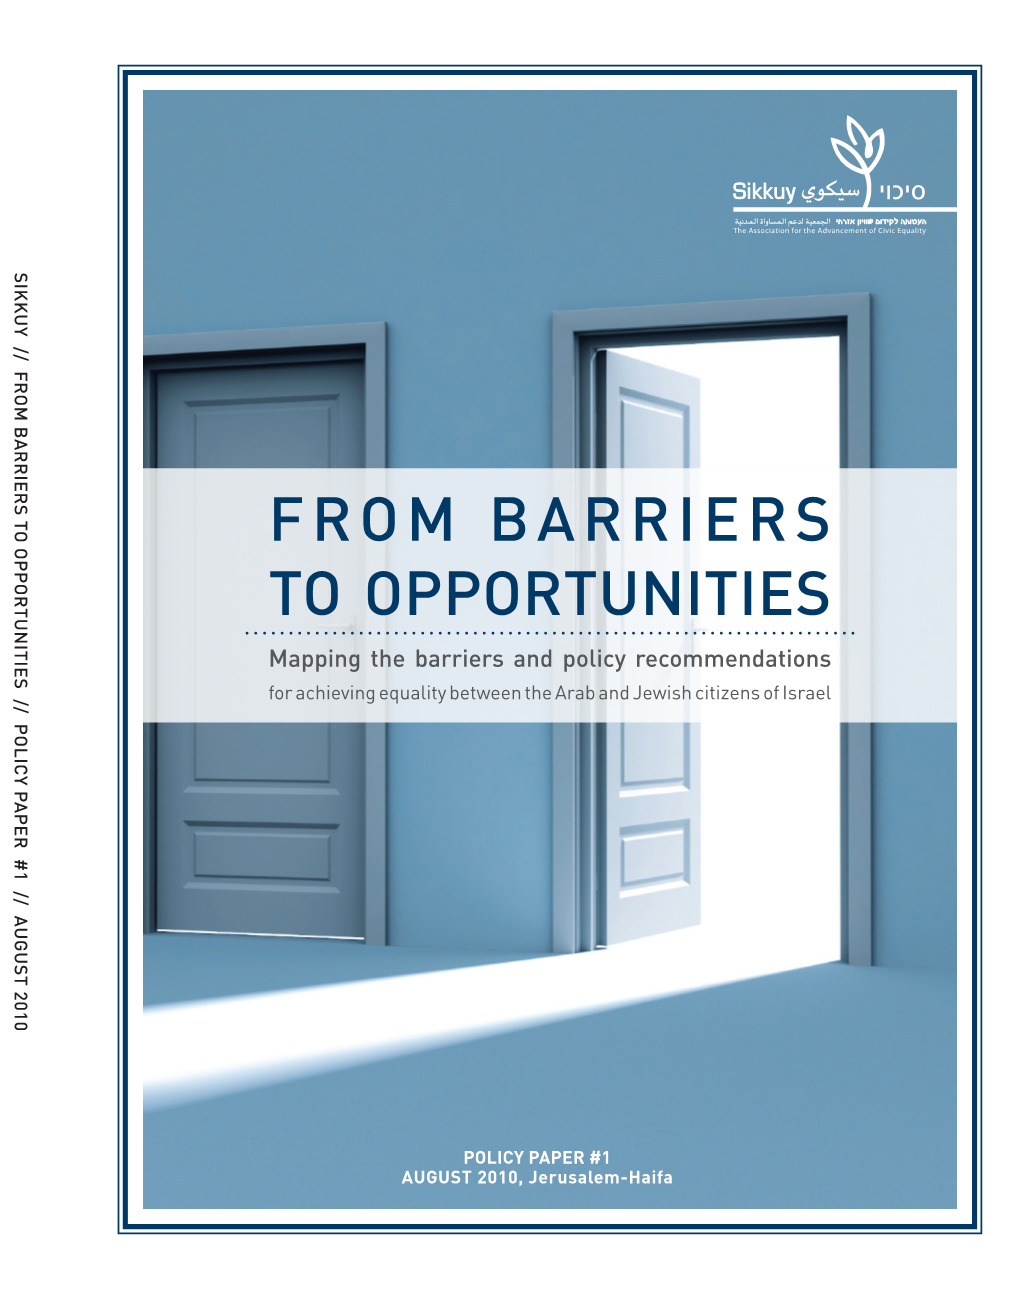 From Barriers to Opportunities Mapping the Barriers and Policy Recommendations for Achieving Equality Between the Arab and Jewish Citizens of Israel